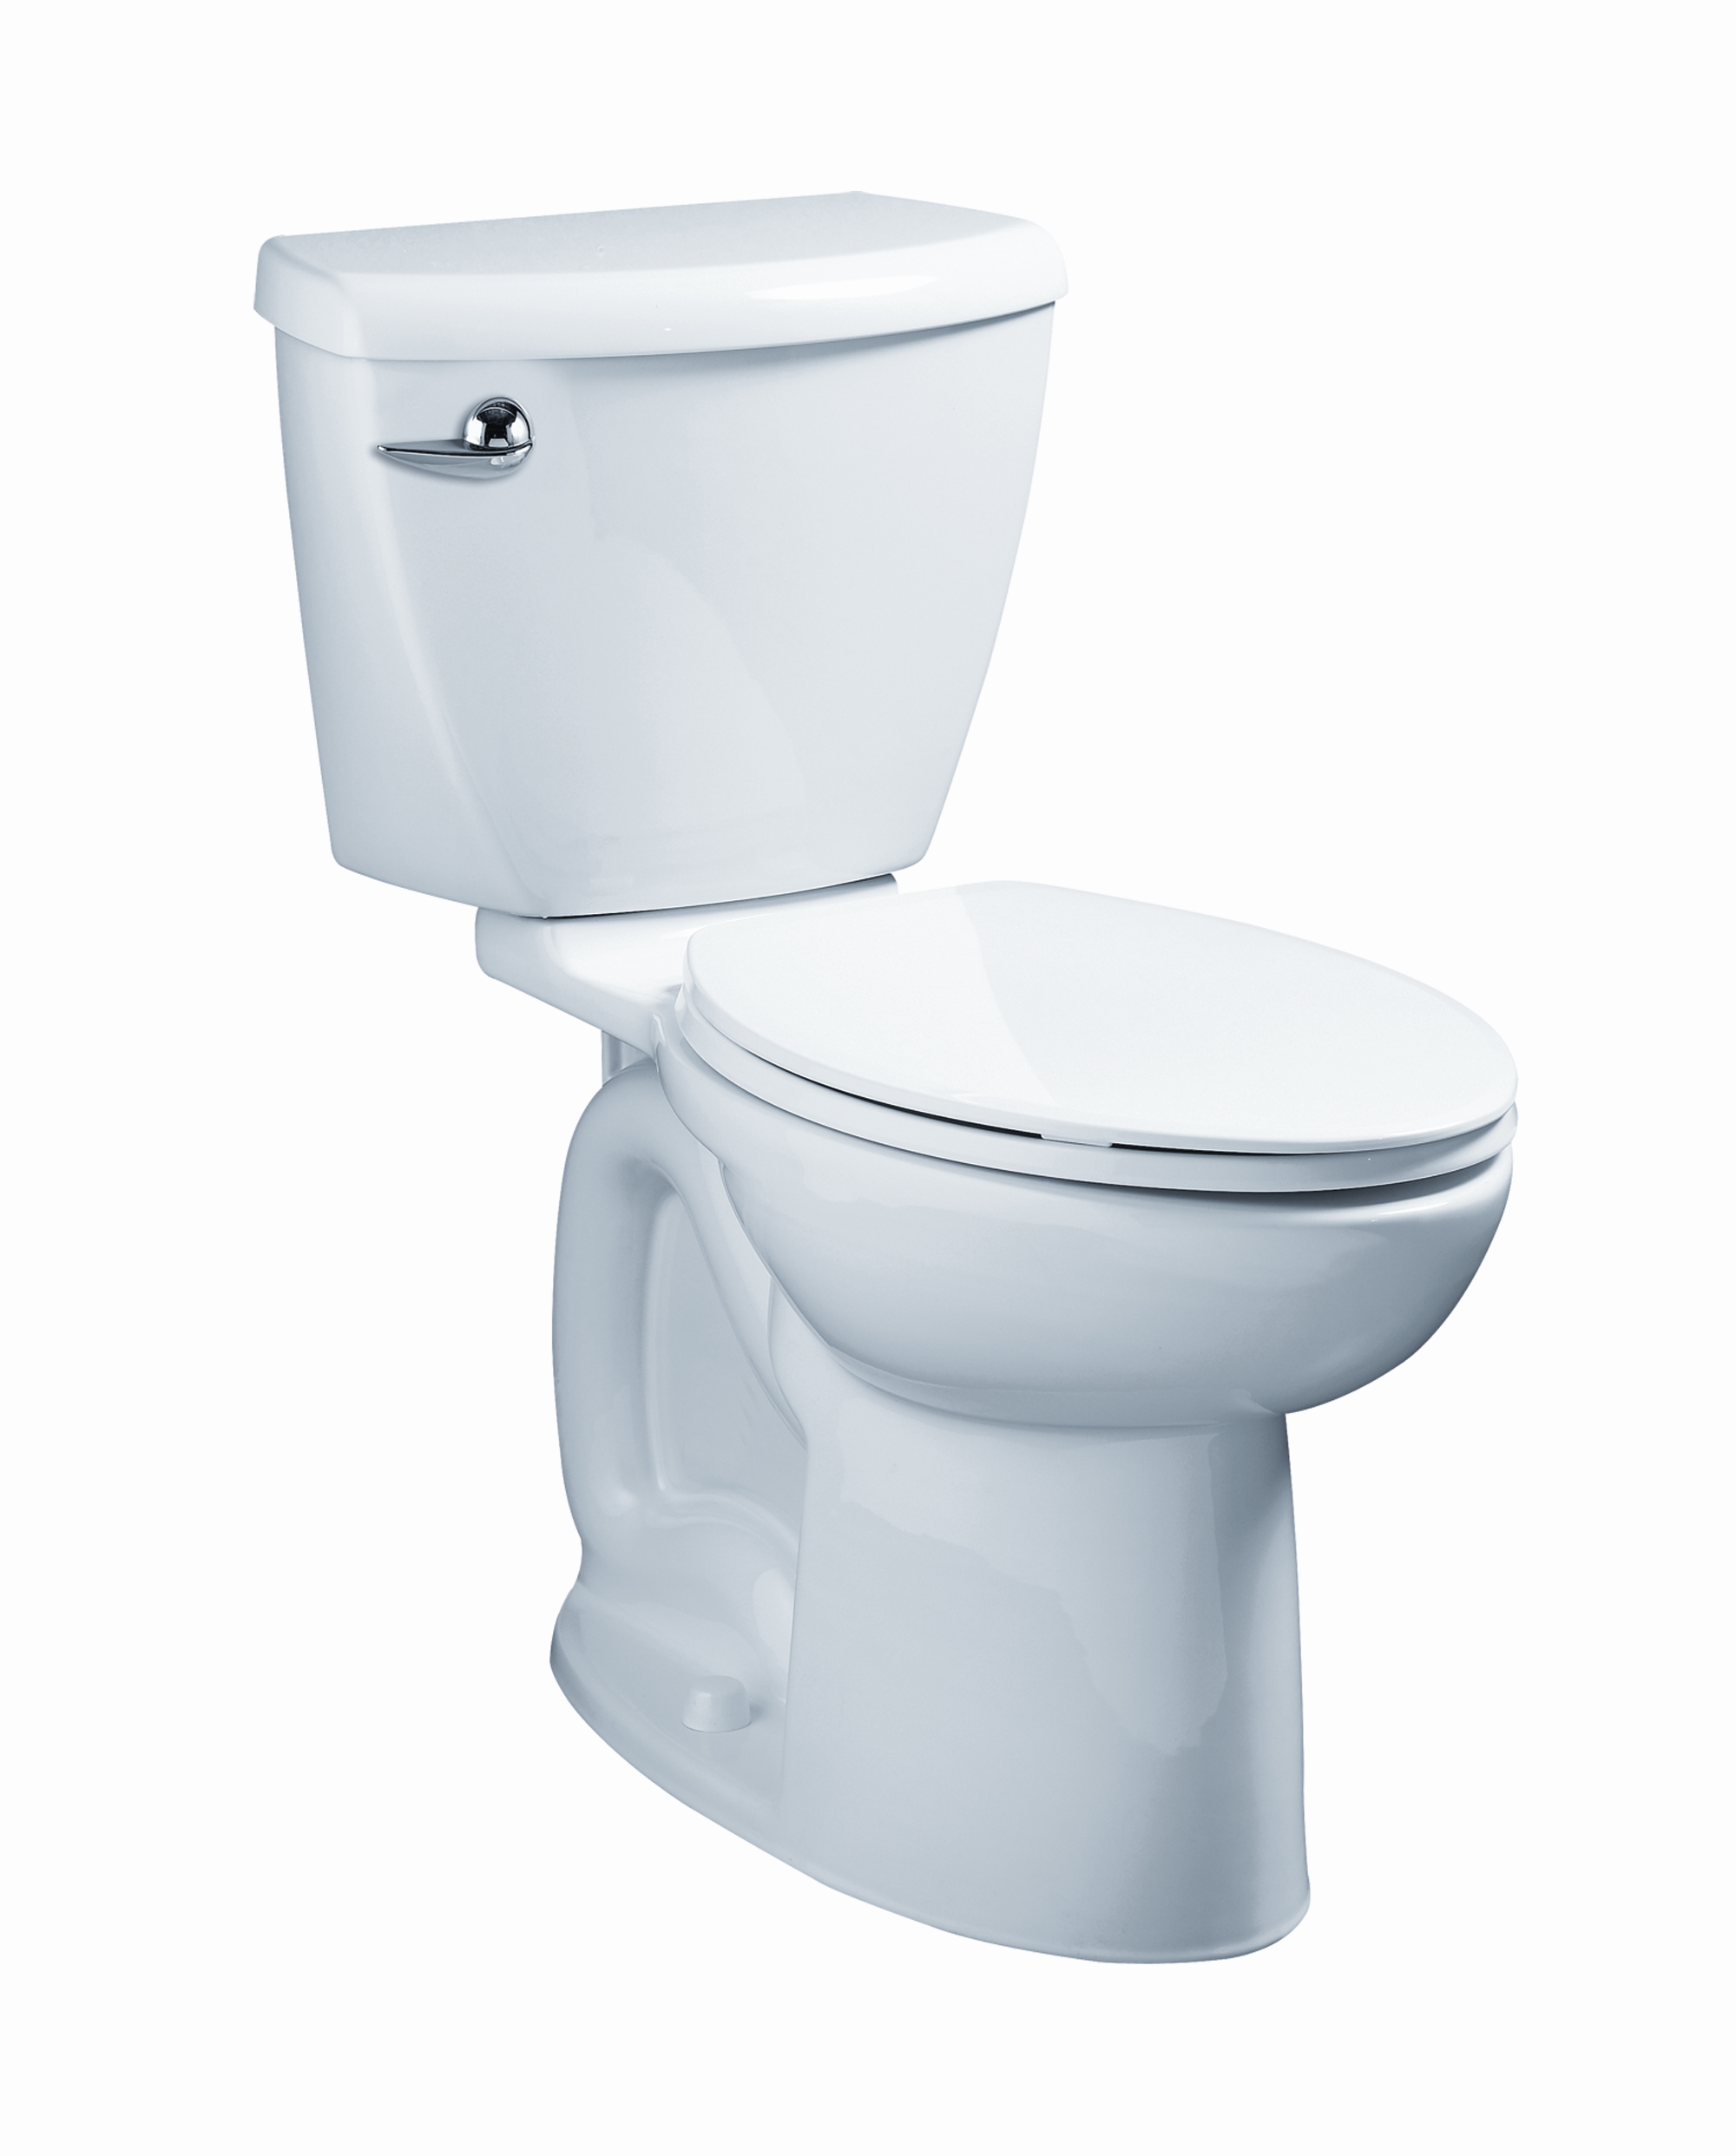 Ravenna 3 Two-Piece 1.6 gpf/6.0 Lpf Chair Height Elongated Complete Toilet With Seat and Lined Tank